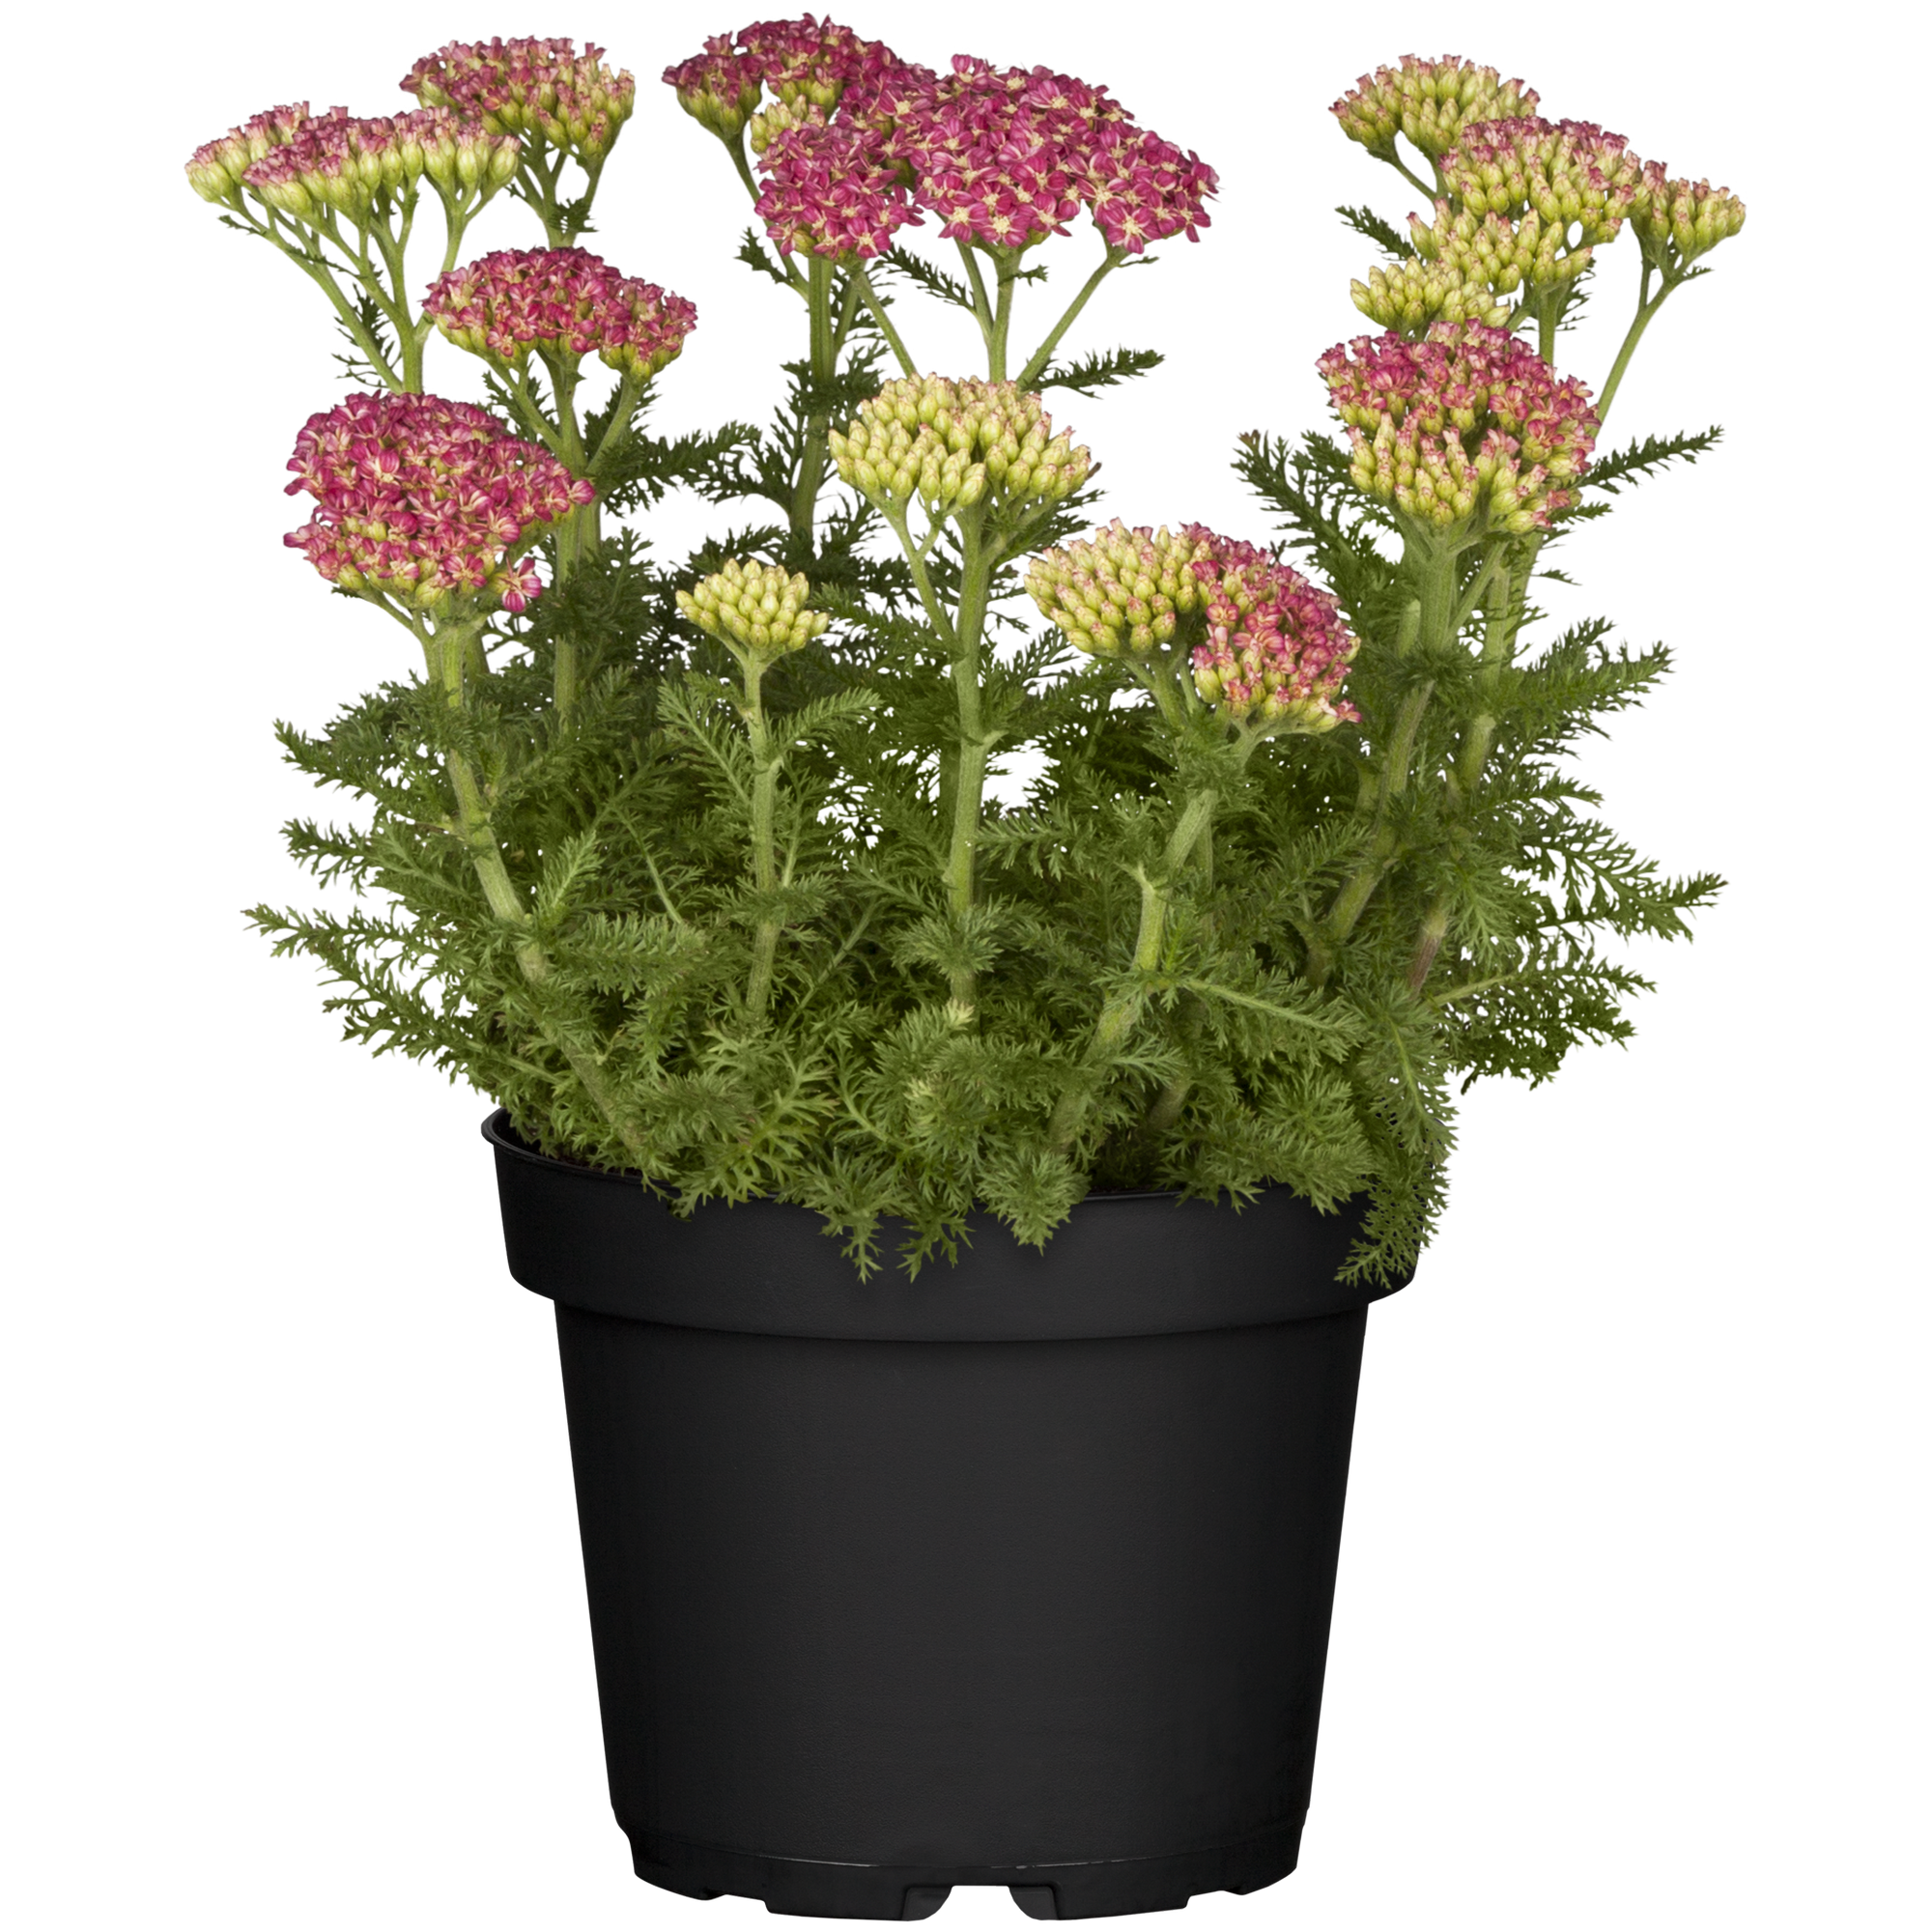 Schafgarbe 'Cerise Queen' pink 15 cm Topf + product picture